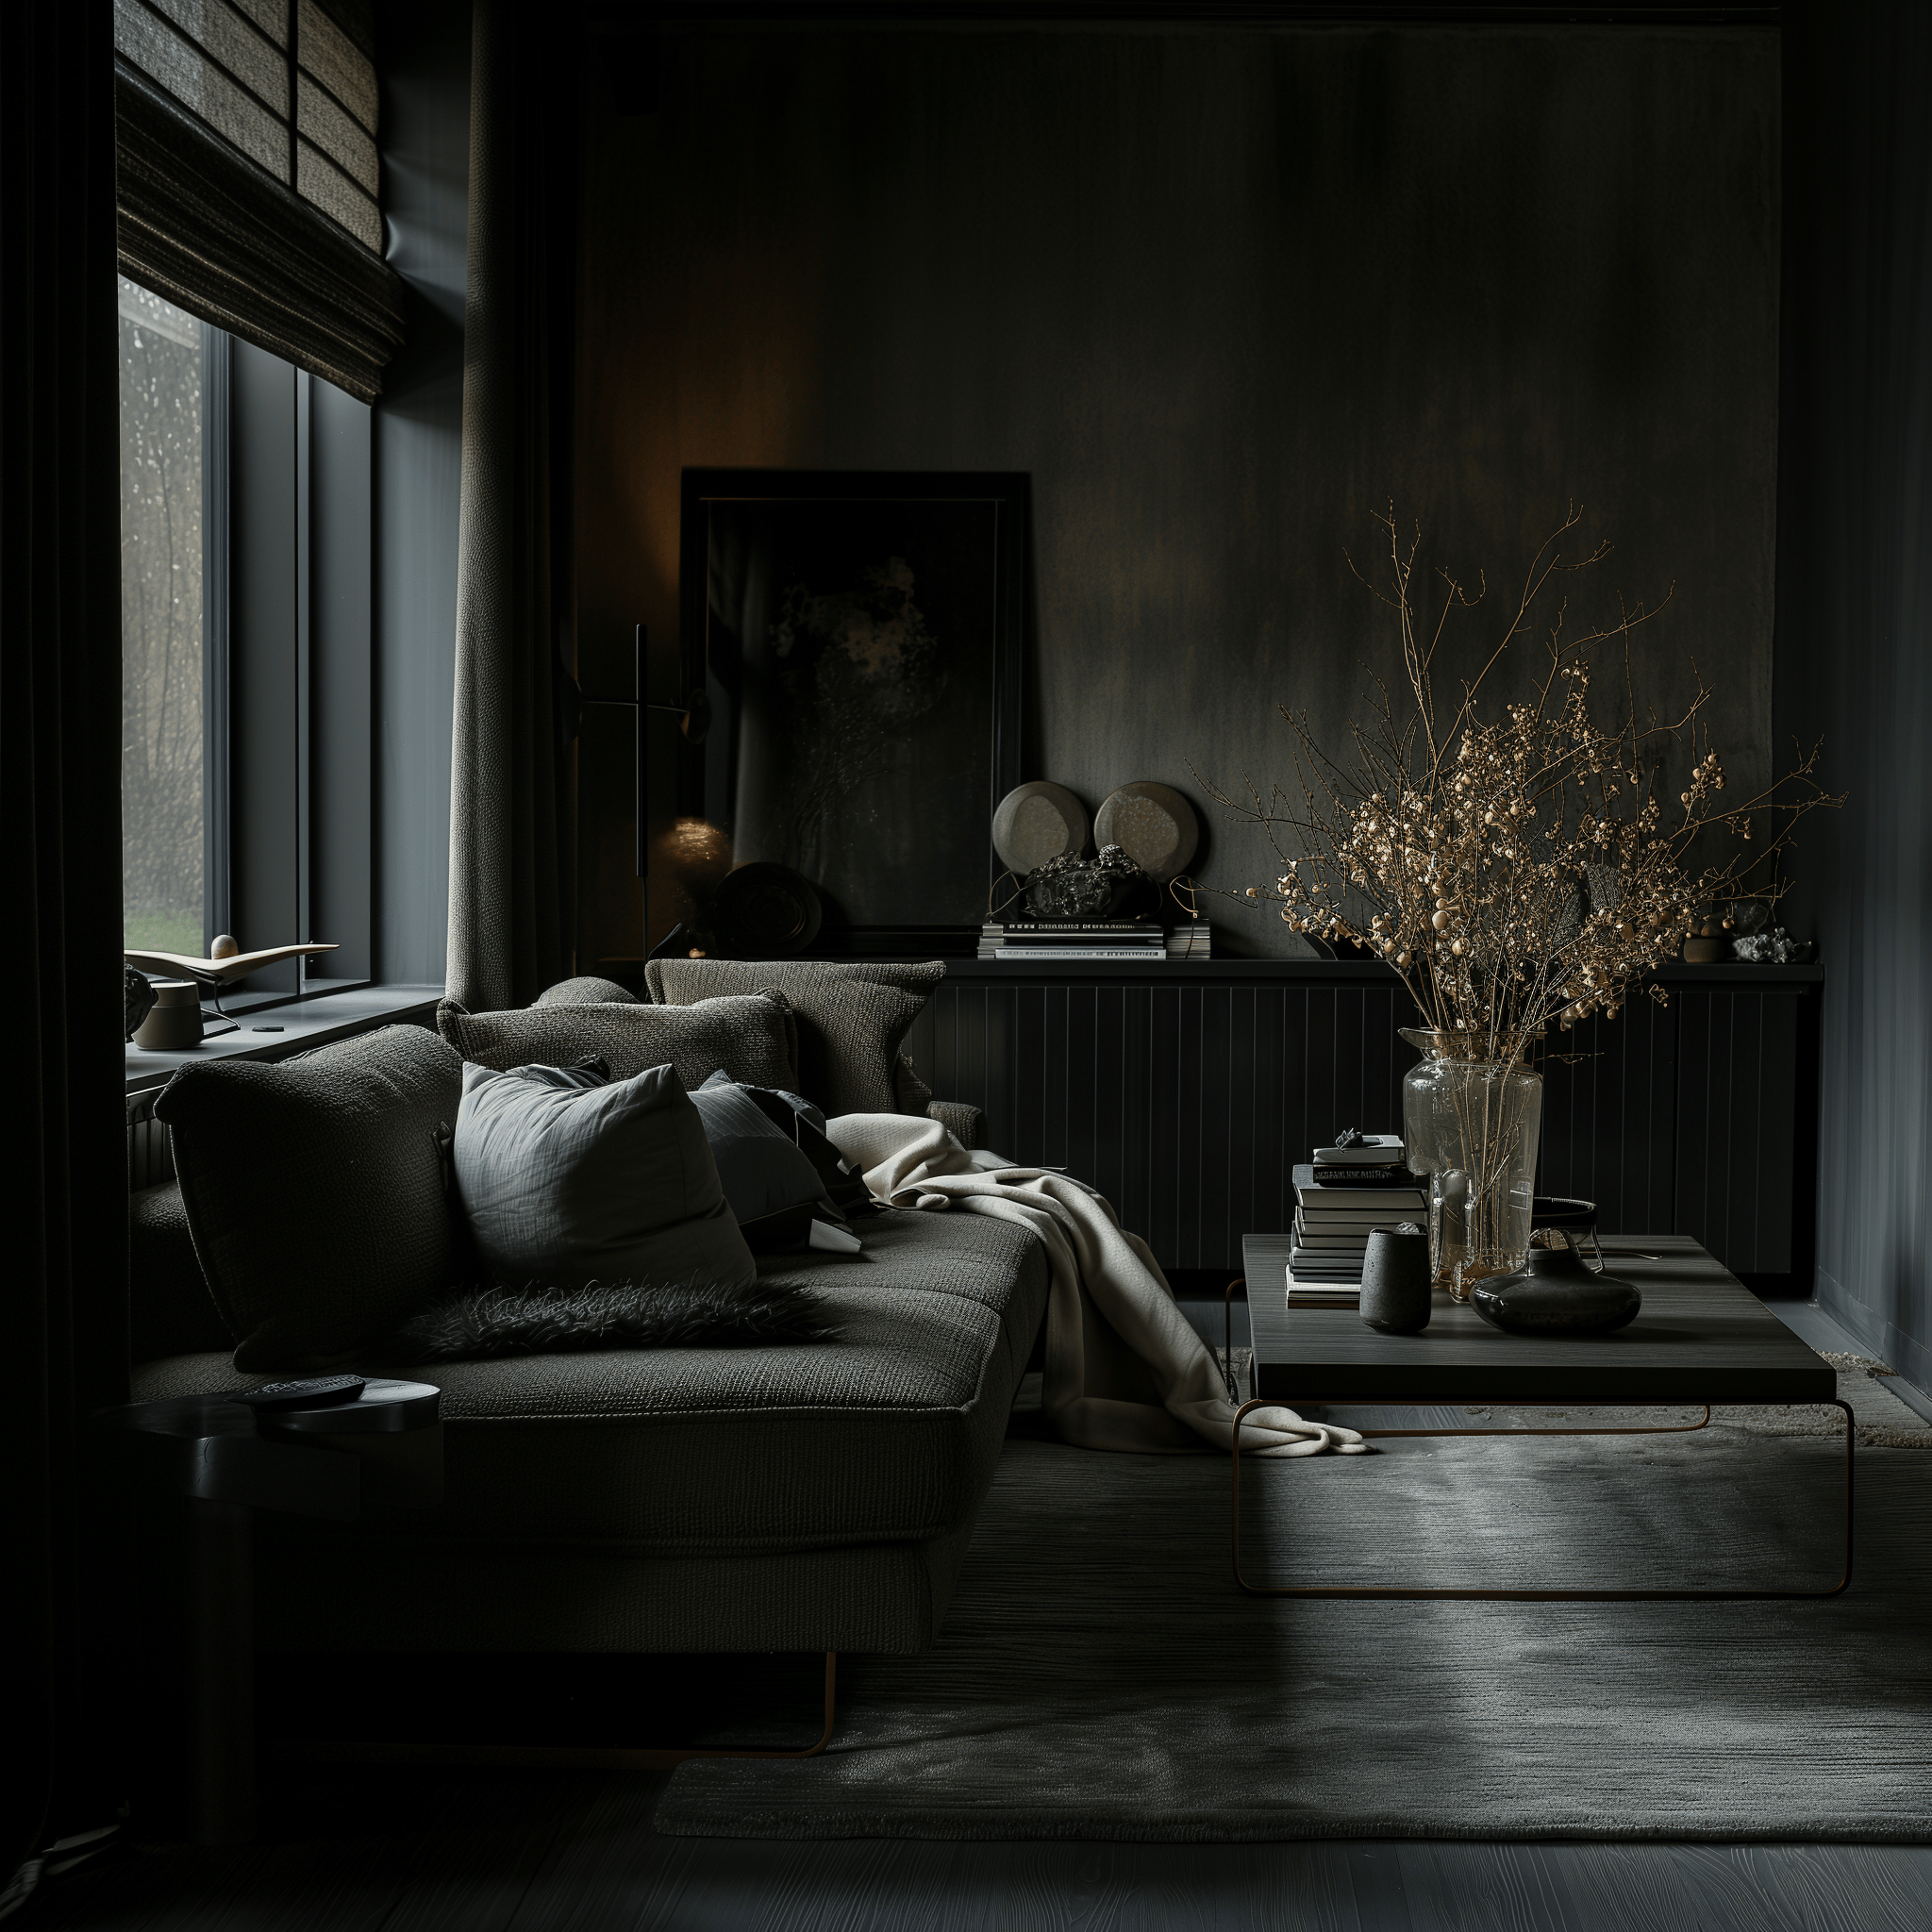 Eye-level view of a homely dark living room, featuring a blend of elegant textiles and designer furniture in natural light.